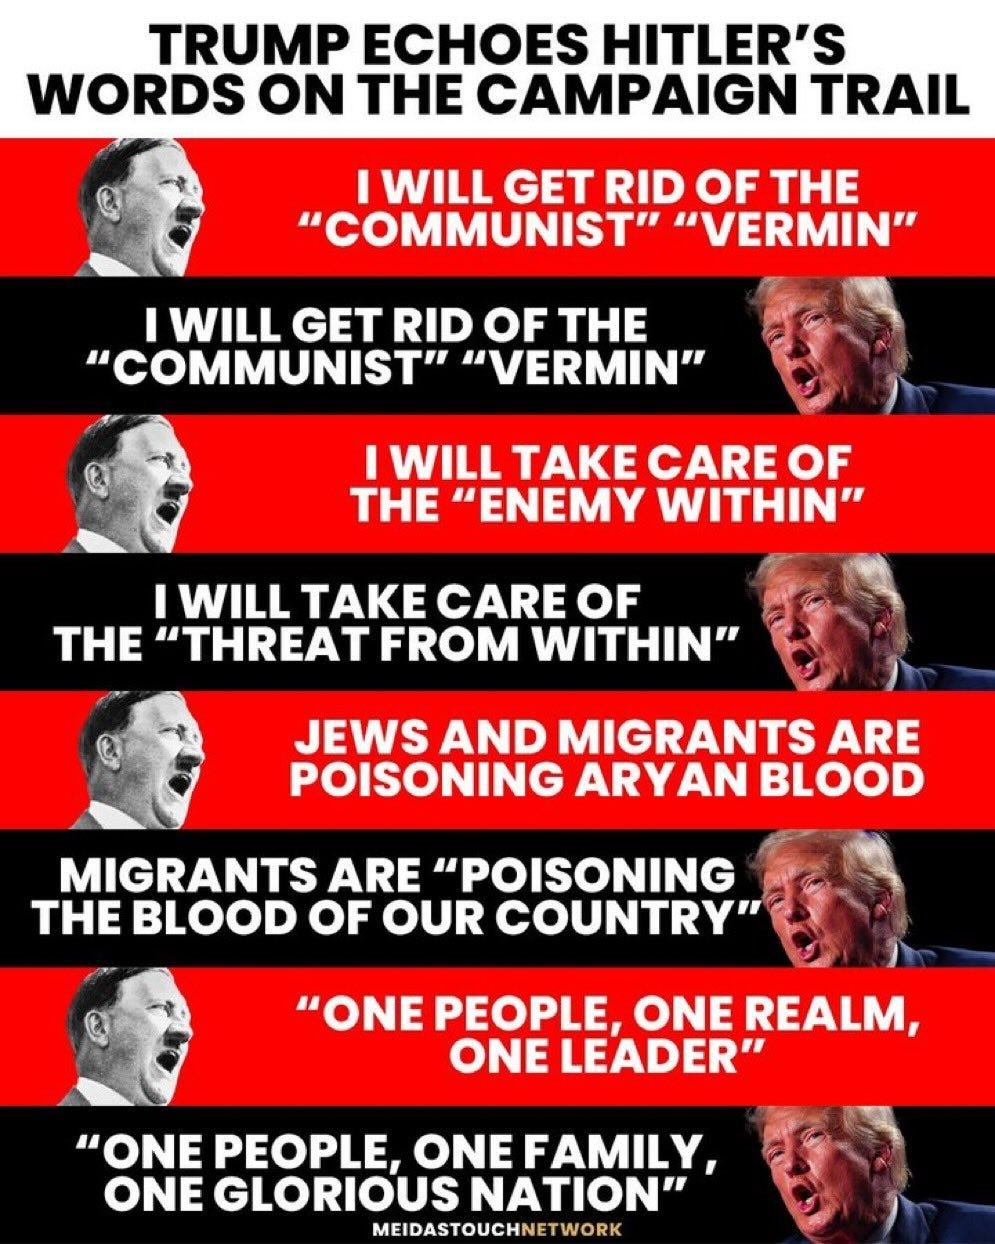 this is a meme comparing Hitler's and Trump's quotes